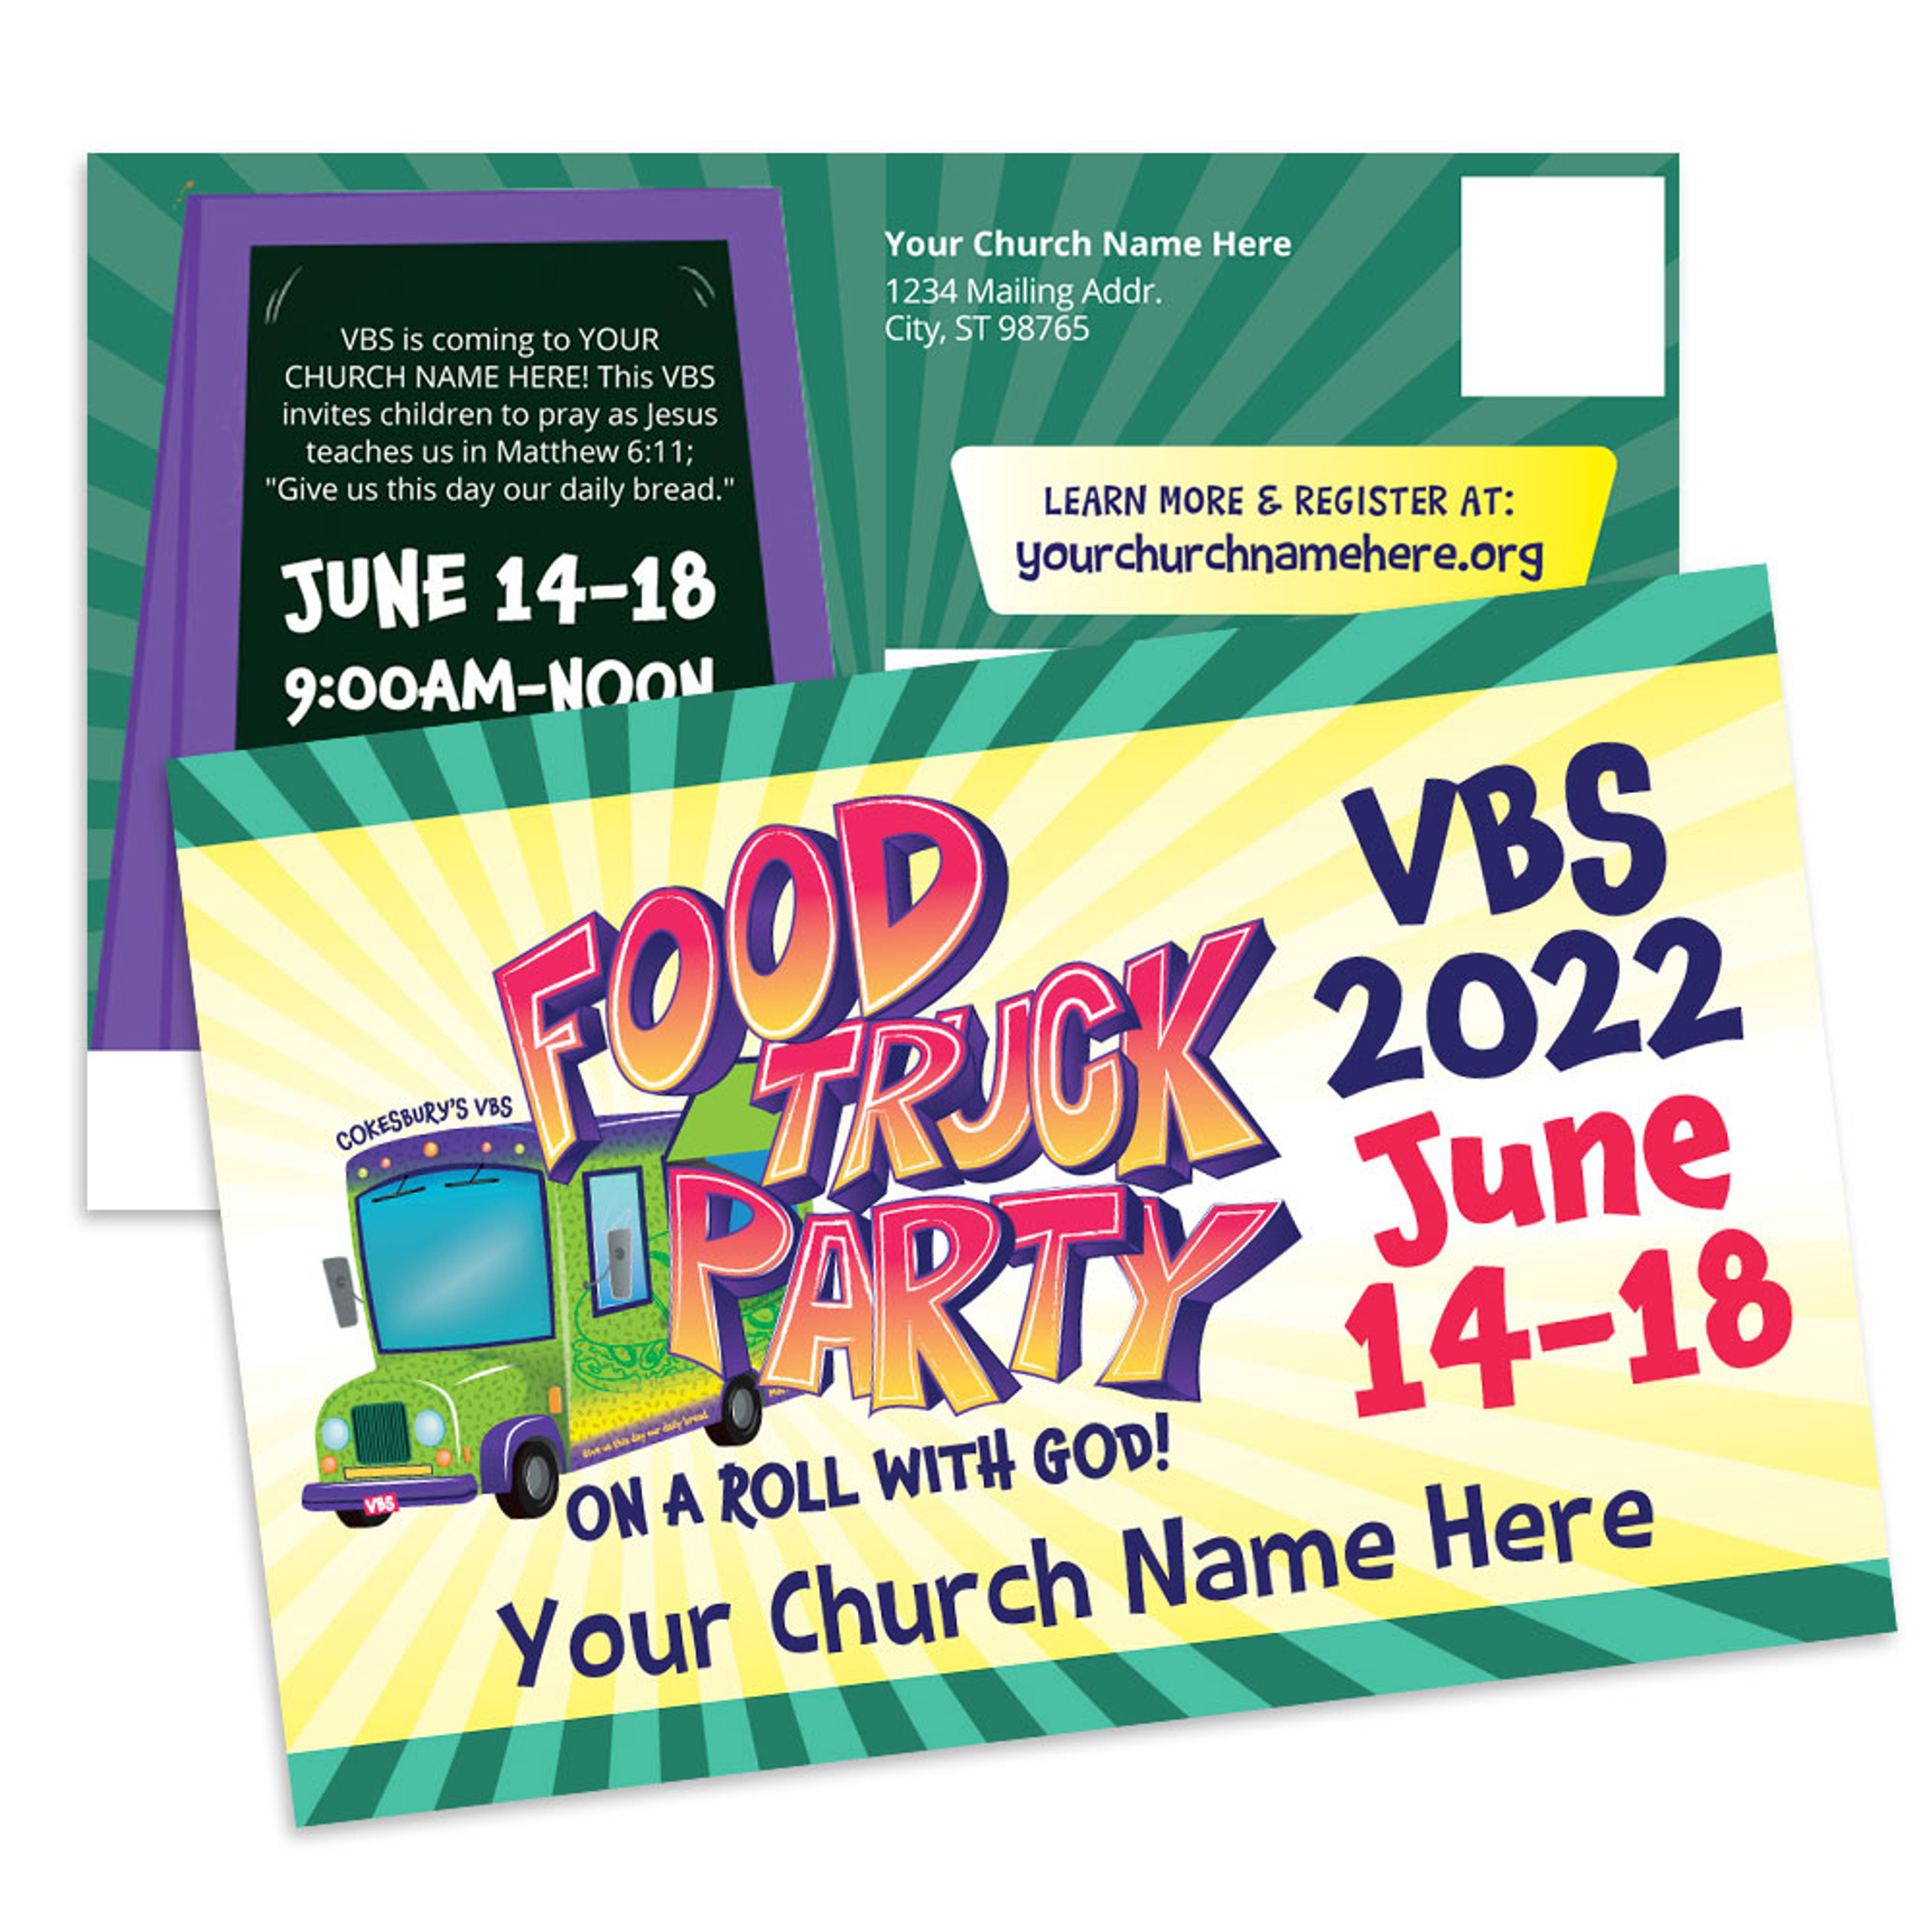 Custom VBS Postcards - Food Truck Party VBS